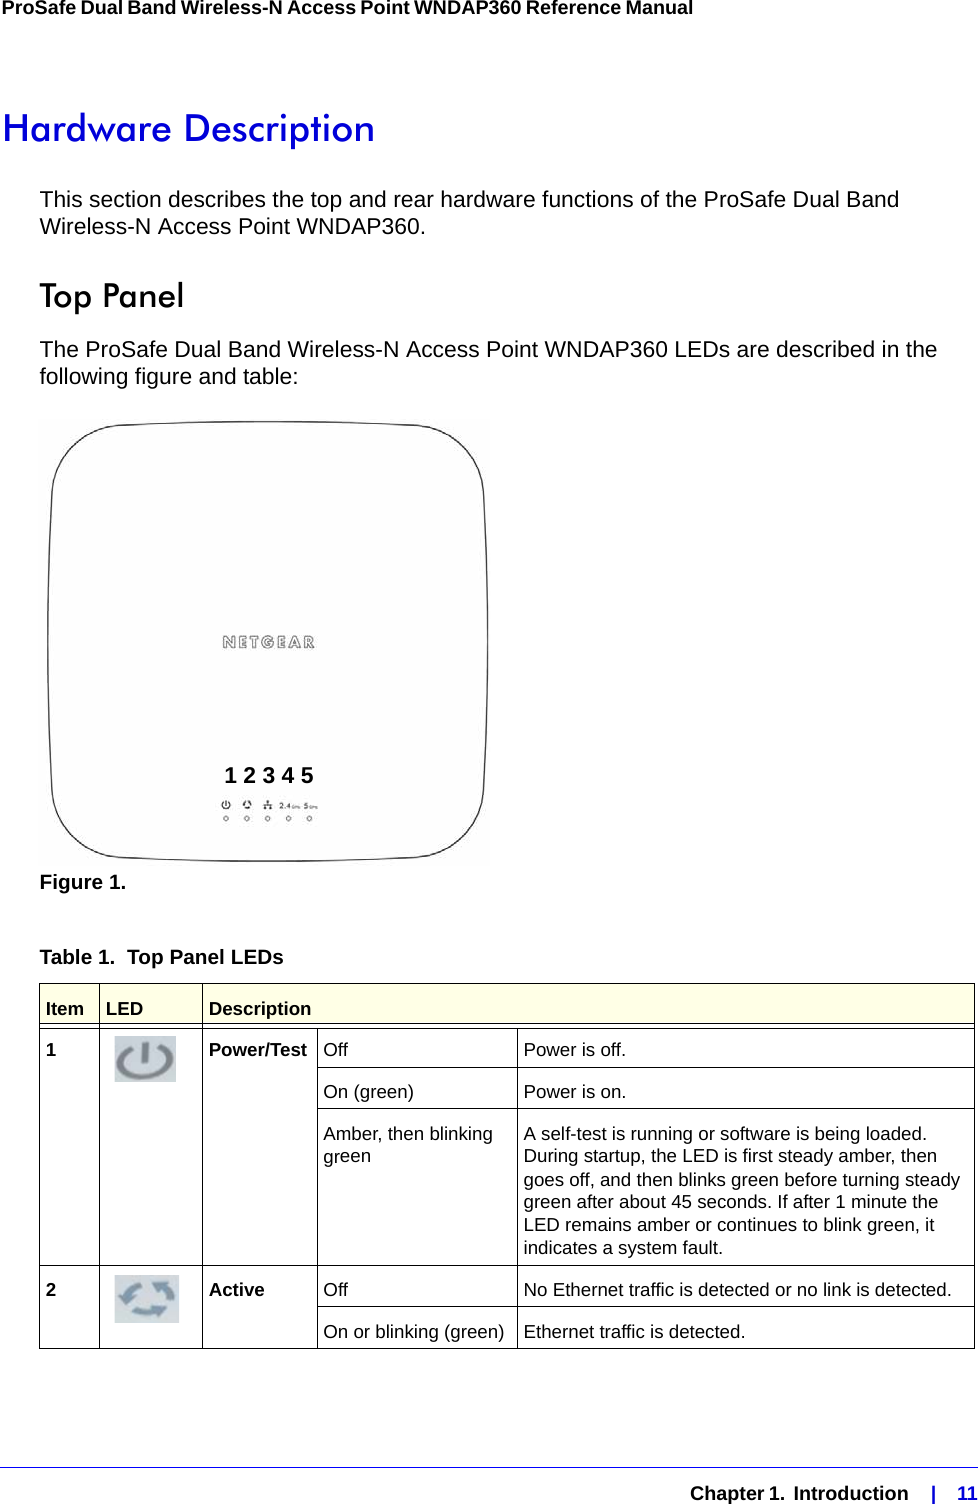   Chapter 1.  Introduction    |    11ProSafe Dual Band Wireless-N Access Point WNDAP360 Reference Manual Hardware Description This section describes the top and rear hardware functions of the ProSafe Dual Band Wireless-N Access Point WNDAP360.Top PanelThe ProSafe Dual Band Wireless-N Access Point WNDAP360 LEDs are described in the following figure and table:Figure 1. Table 1.  Top Panel LEDs Item LED Description1Power/Test Off  Power is off.On (green) Power is on.Amber, then blinking green A self-test is running or software is being loaded. During startup, the LED is first steady amber, then goes off, and then blinks green before turning steady green after about 45 seconds. If after 1 minute the LED remains amber or continues to blink green, it indicates a system fault.2Active Off No Ethernet traffic is detected or no link is detected.On or blinking (green) Ethernet traffic is detected.1 2 3 4 5